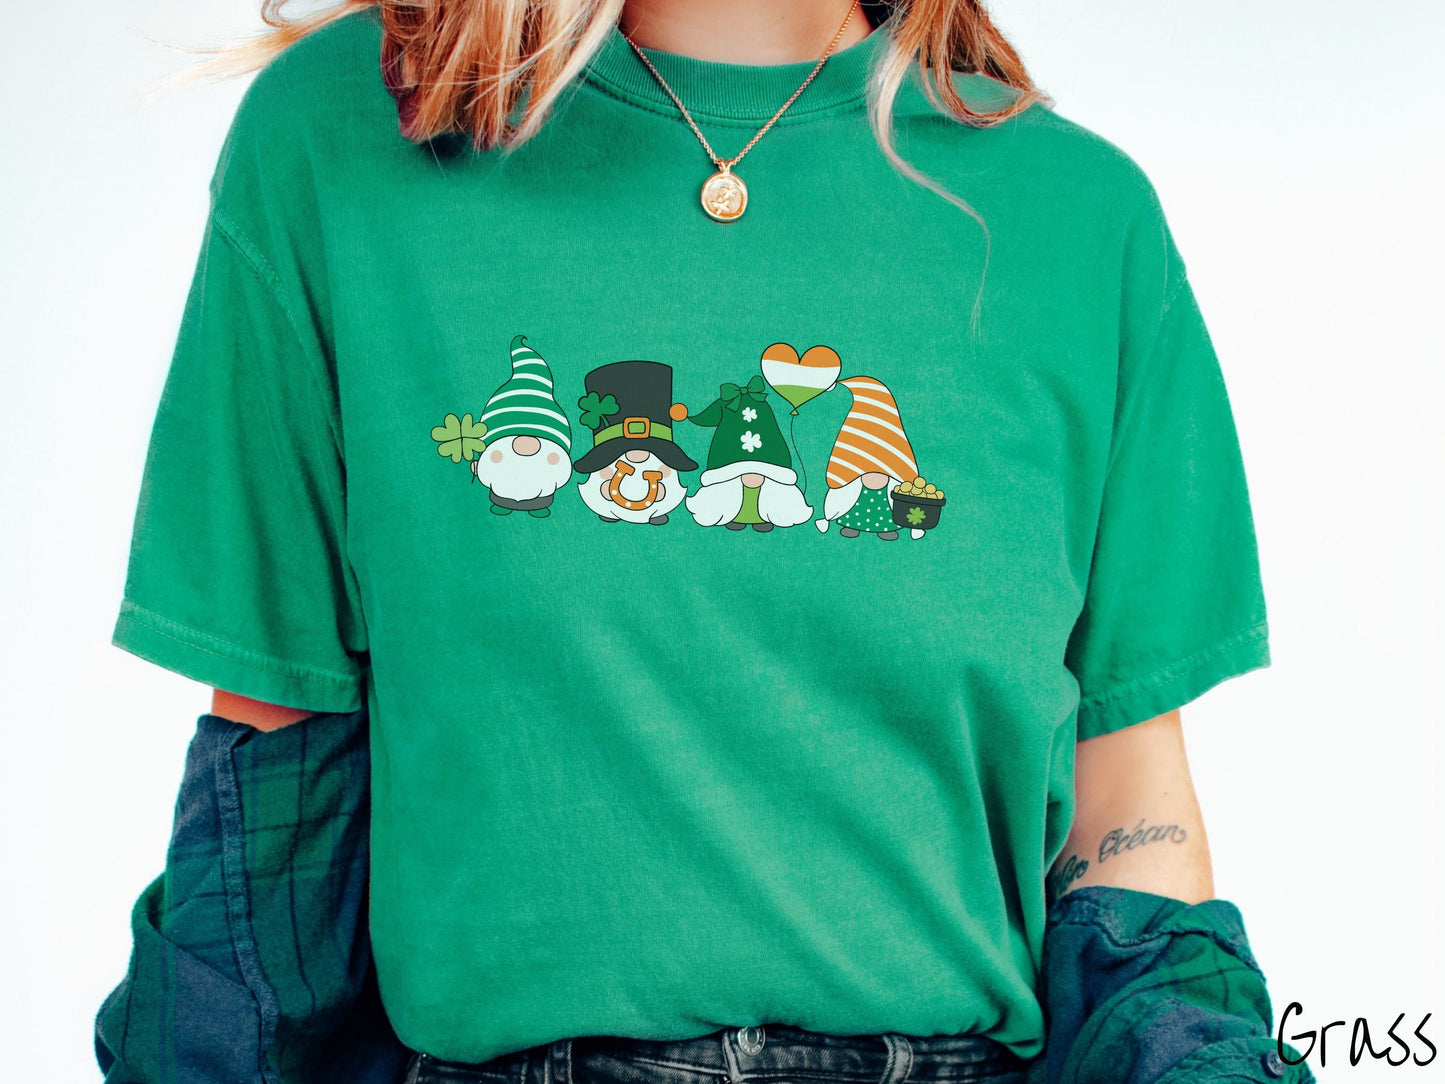 A woman wearing a vintage, grass colored shirt with four festive gnomes wearing varying green, white, and orange hats holding a green clover, an inflatable balloon, an orange horse shoe, and a pot of gold.